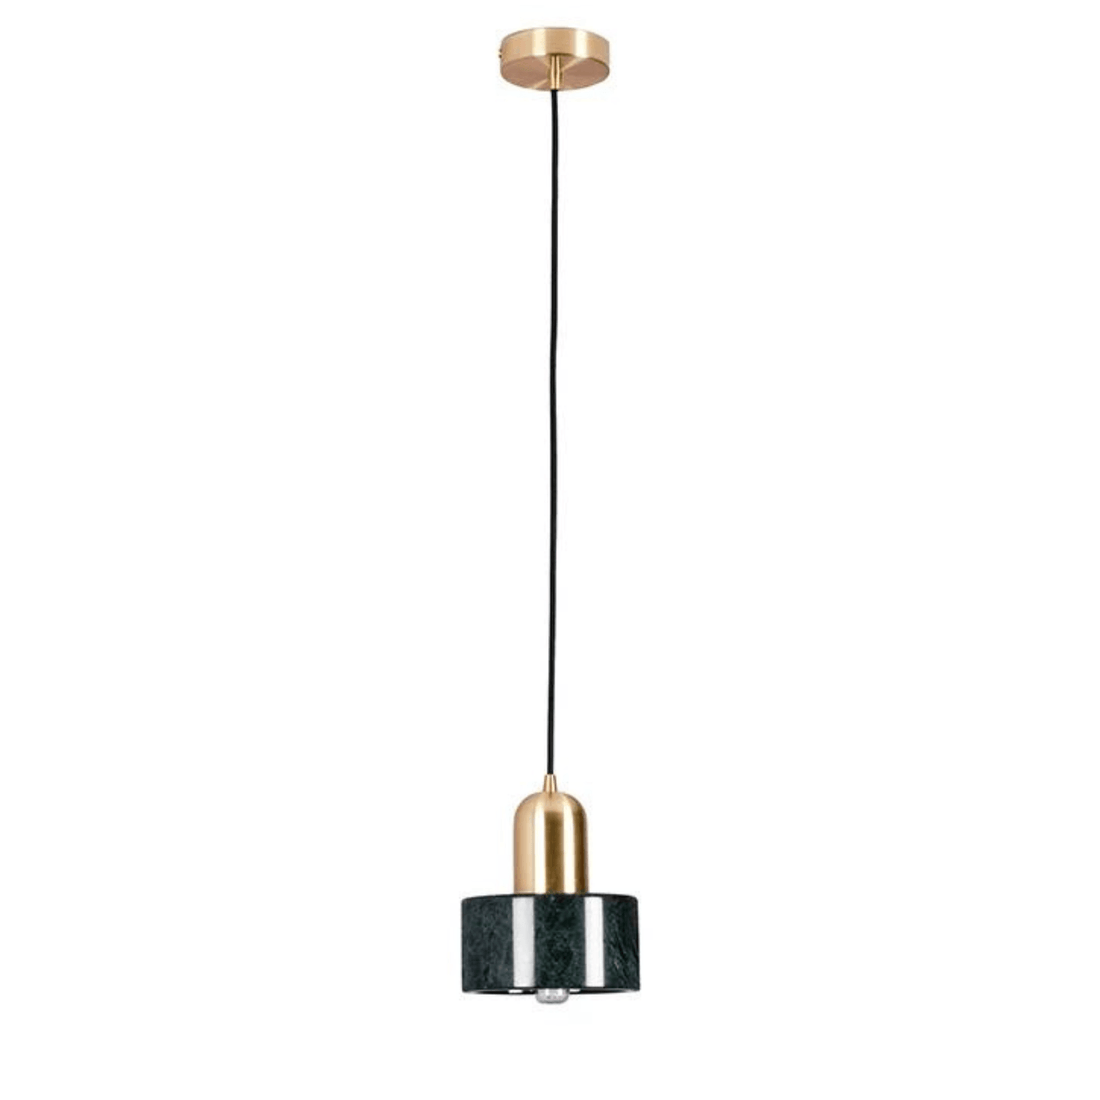 Shine Marble Pendant Light by The Light Library